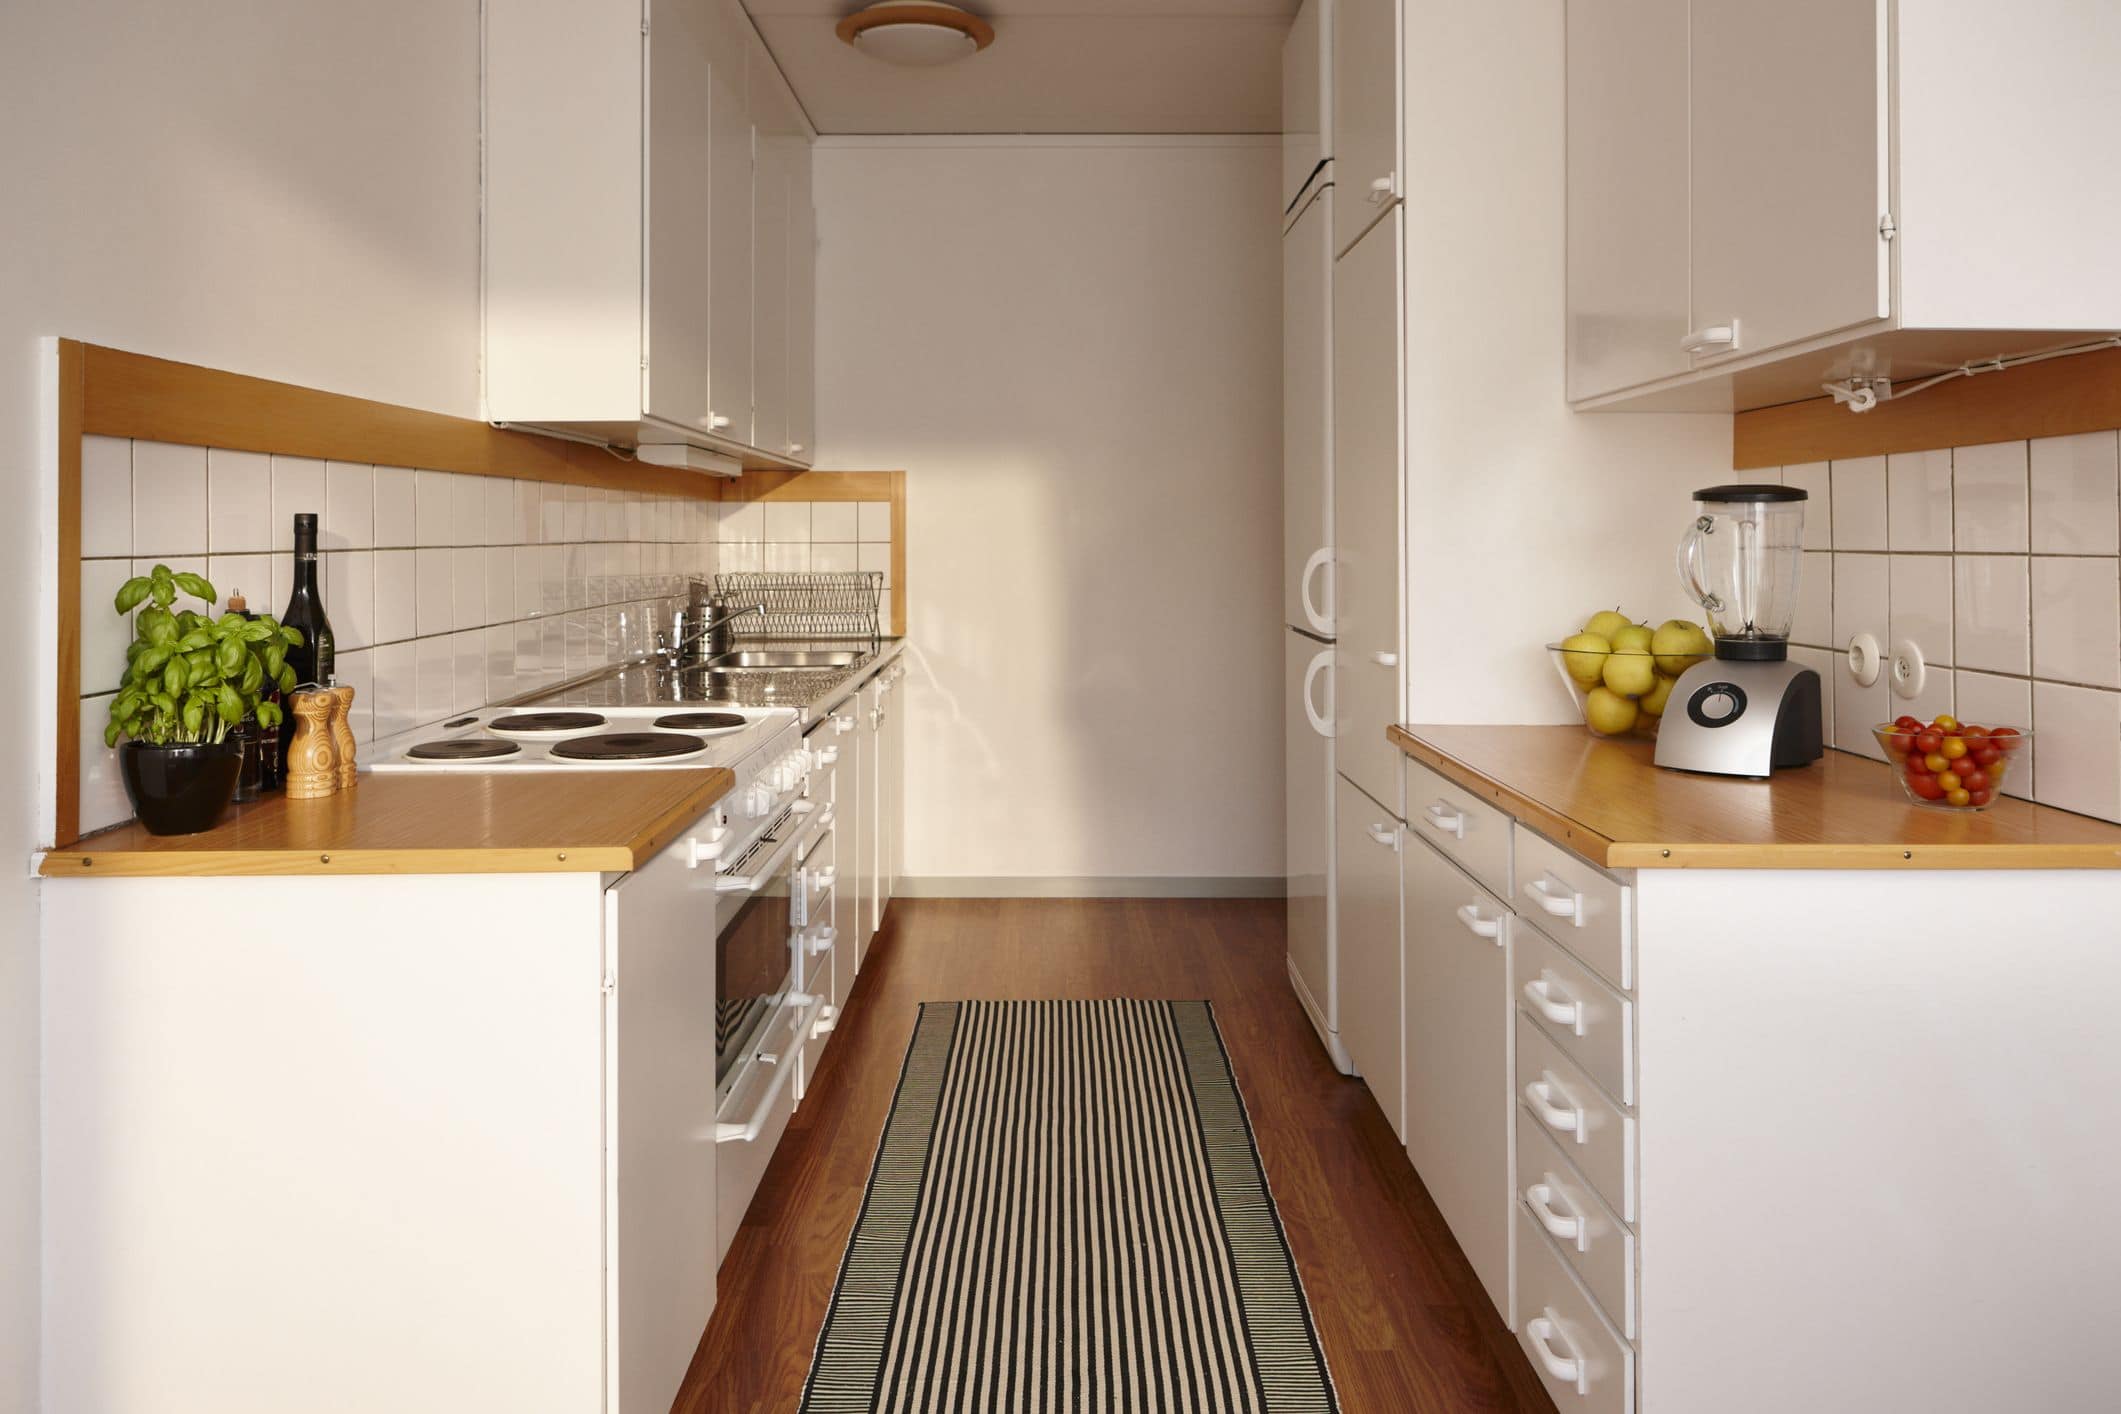 Galley kitchen layout in Charleston, SC, showcasing a narrow workspace with cabinets and appliances aligned along two parallel walls for efficient cooking and food preparation.